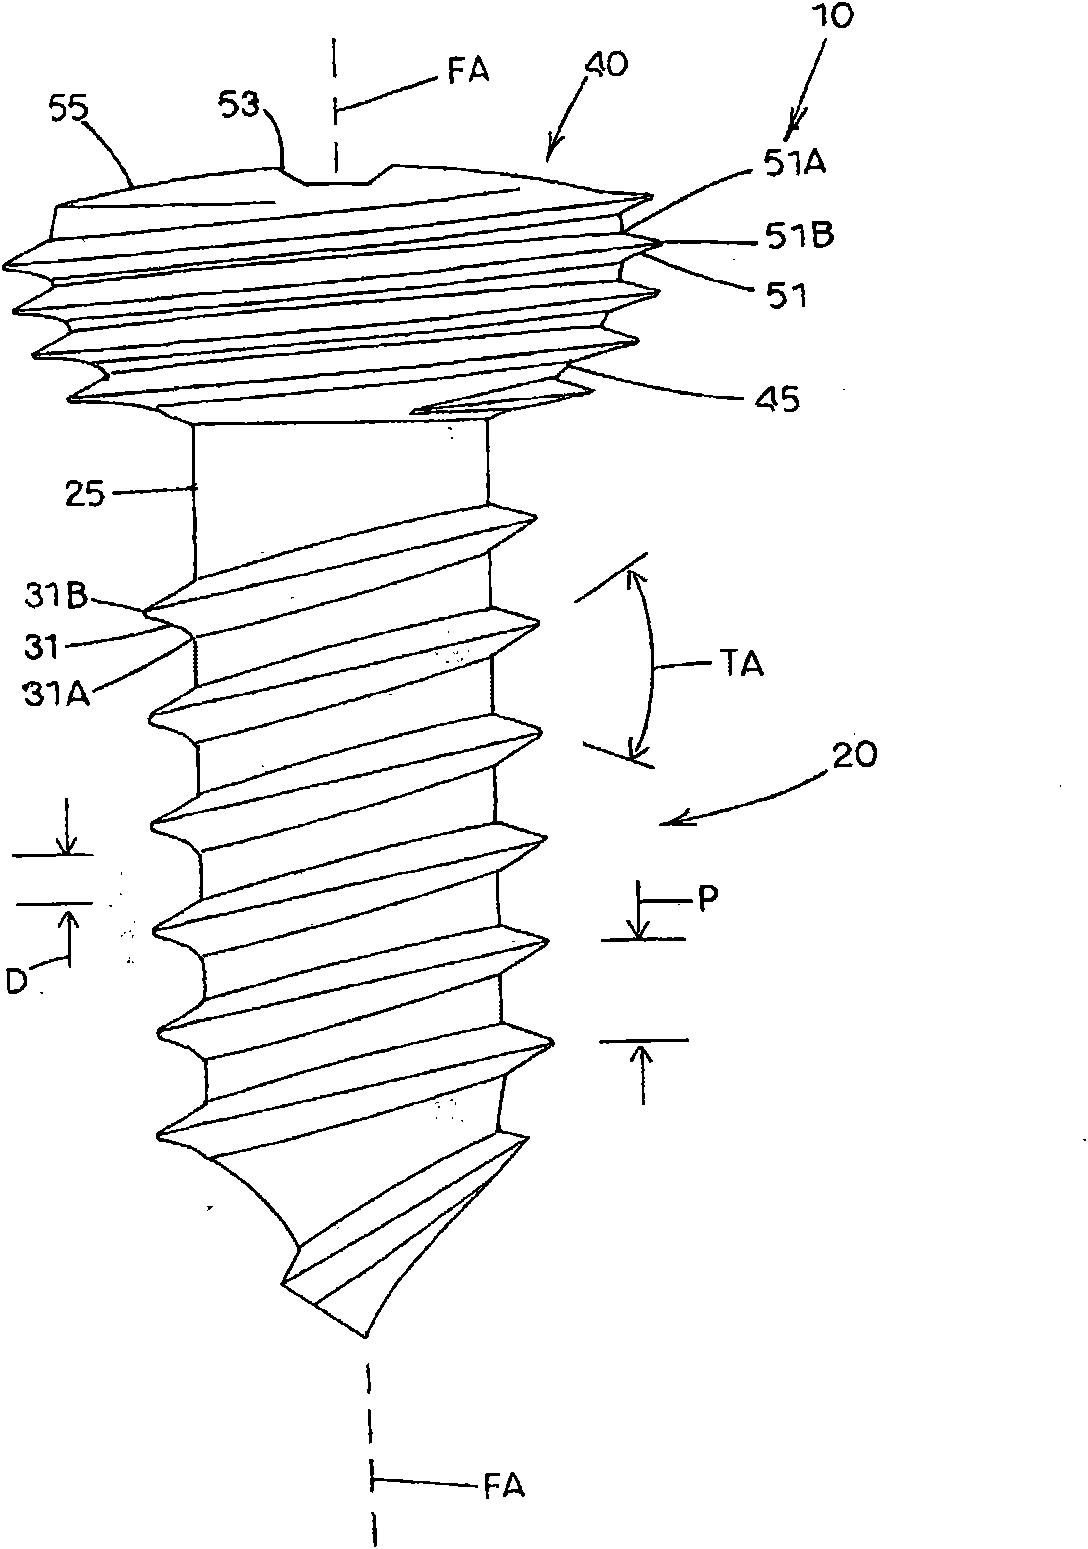 Anti-unscrewing and multi-angular fastening apparatuses and methods for surgical bone screw/plate systems